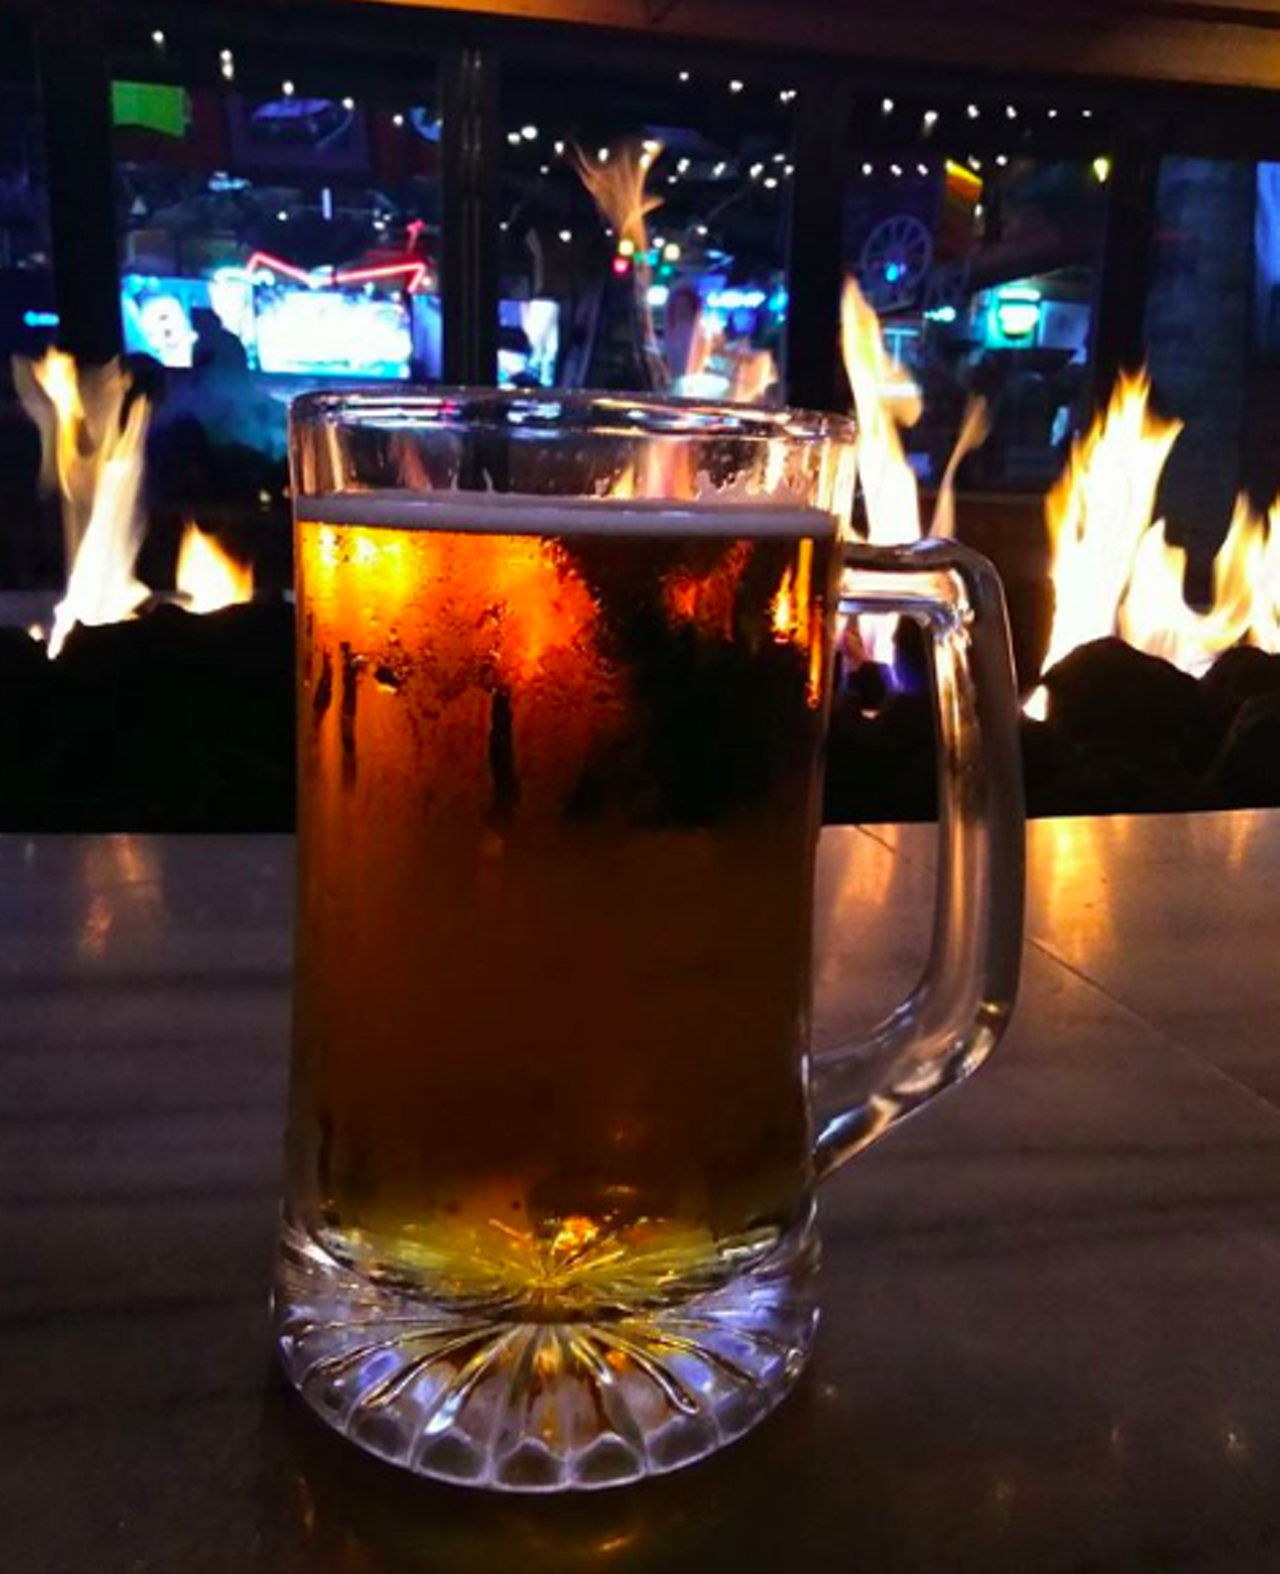 54th Street Grill & Bar
Multiple locations, 54thstreetgrill.com
With five San Antonio-area locations, it should come as no surprise that locals love this chain. Whether it be for the strong drinks or good grub, we’re thinking the patio – complete with a fire pit – has something to do with it.
Photo via Instagram / stewardrussell